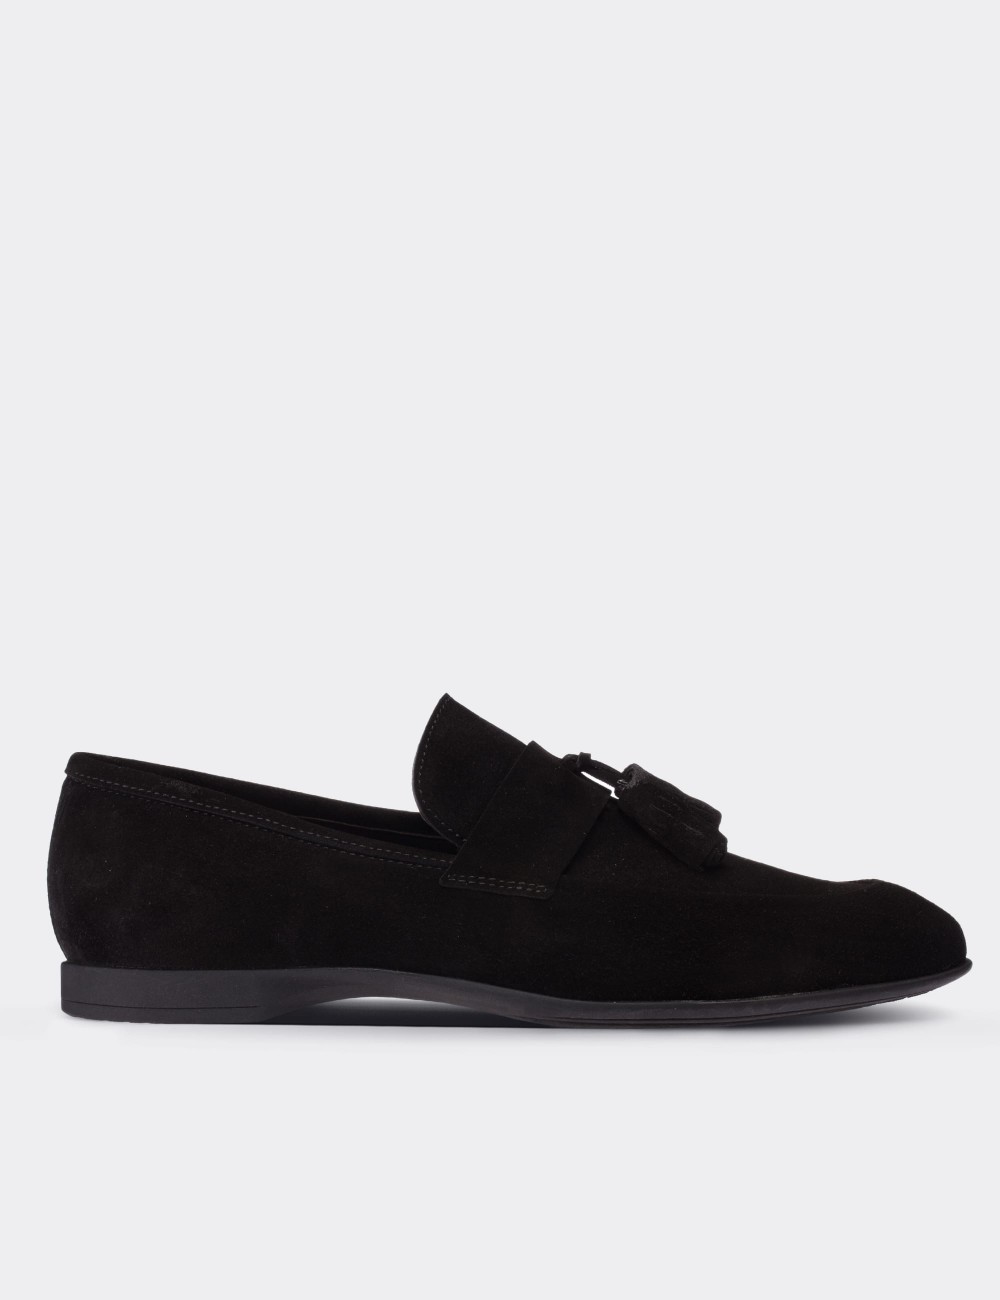 Black Suede Leather Loafers - 01523MSYHC03